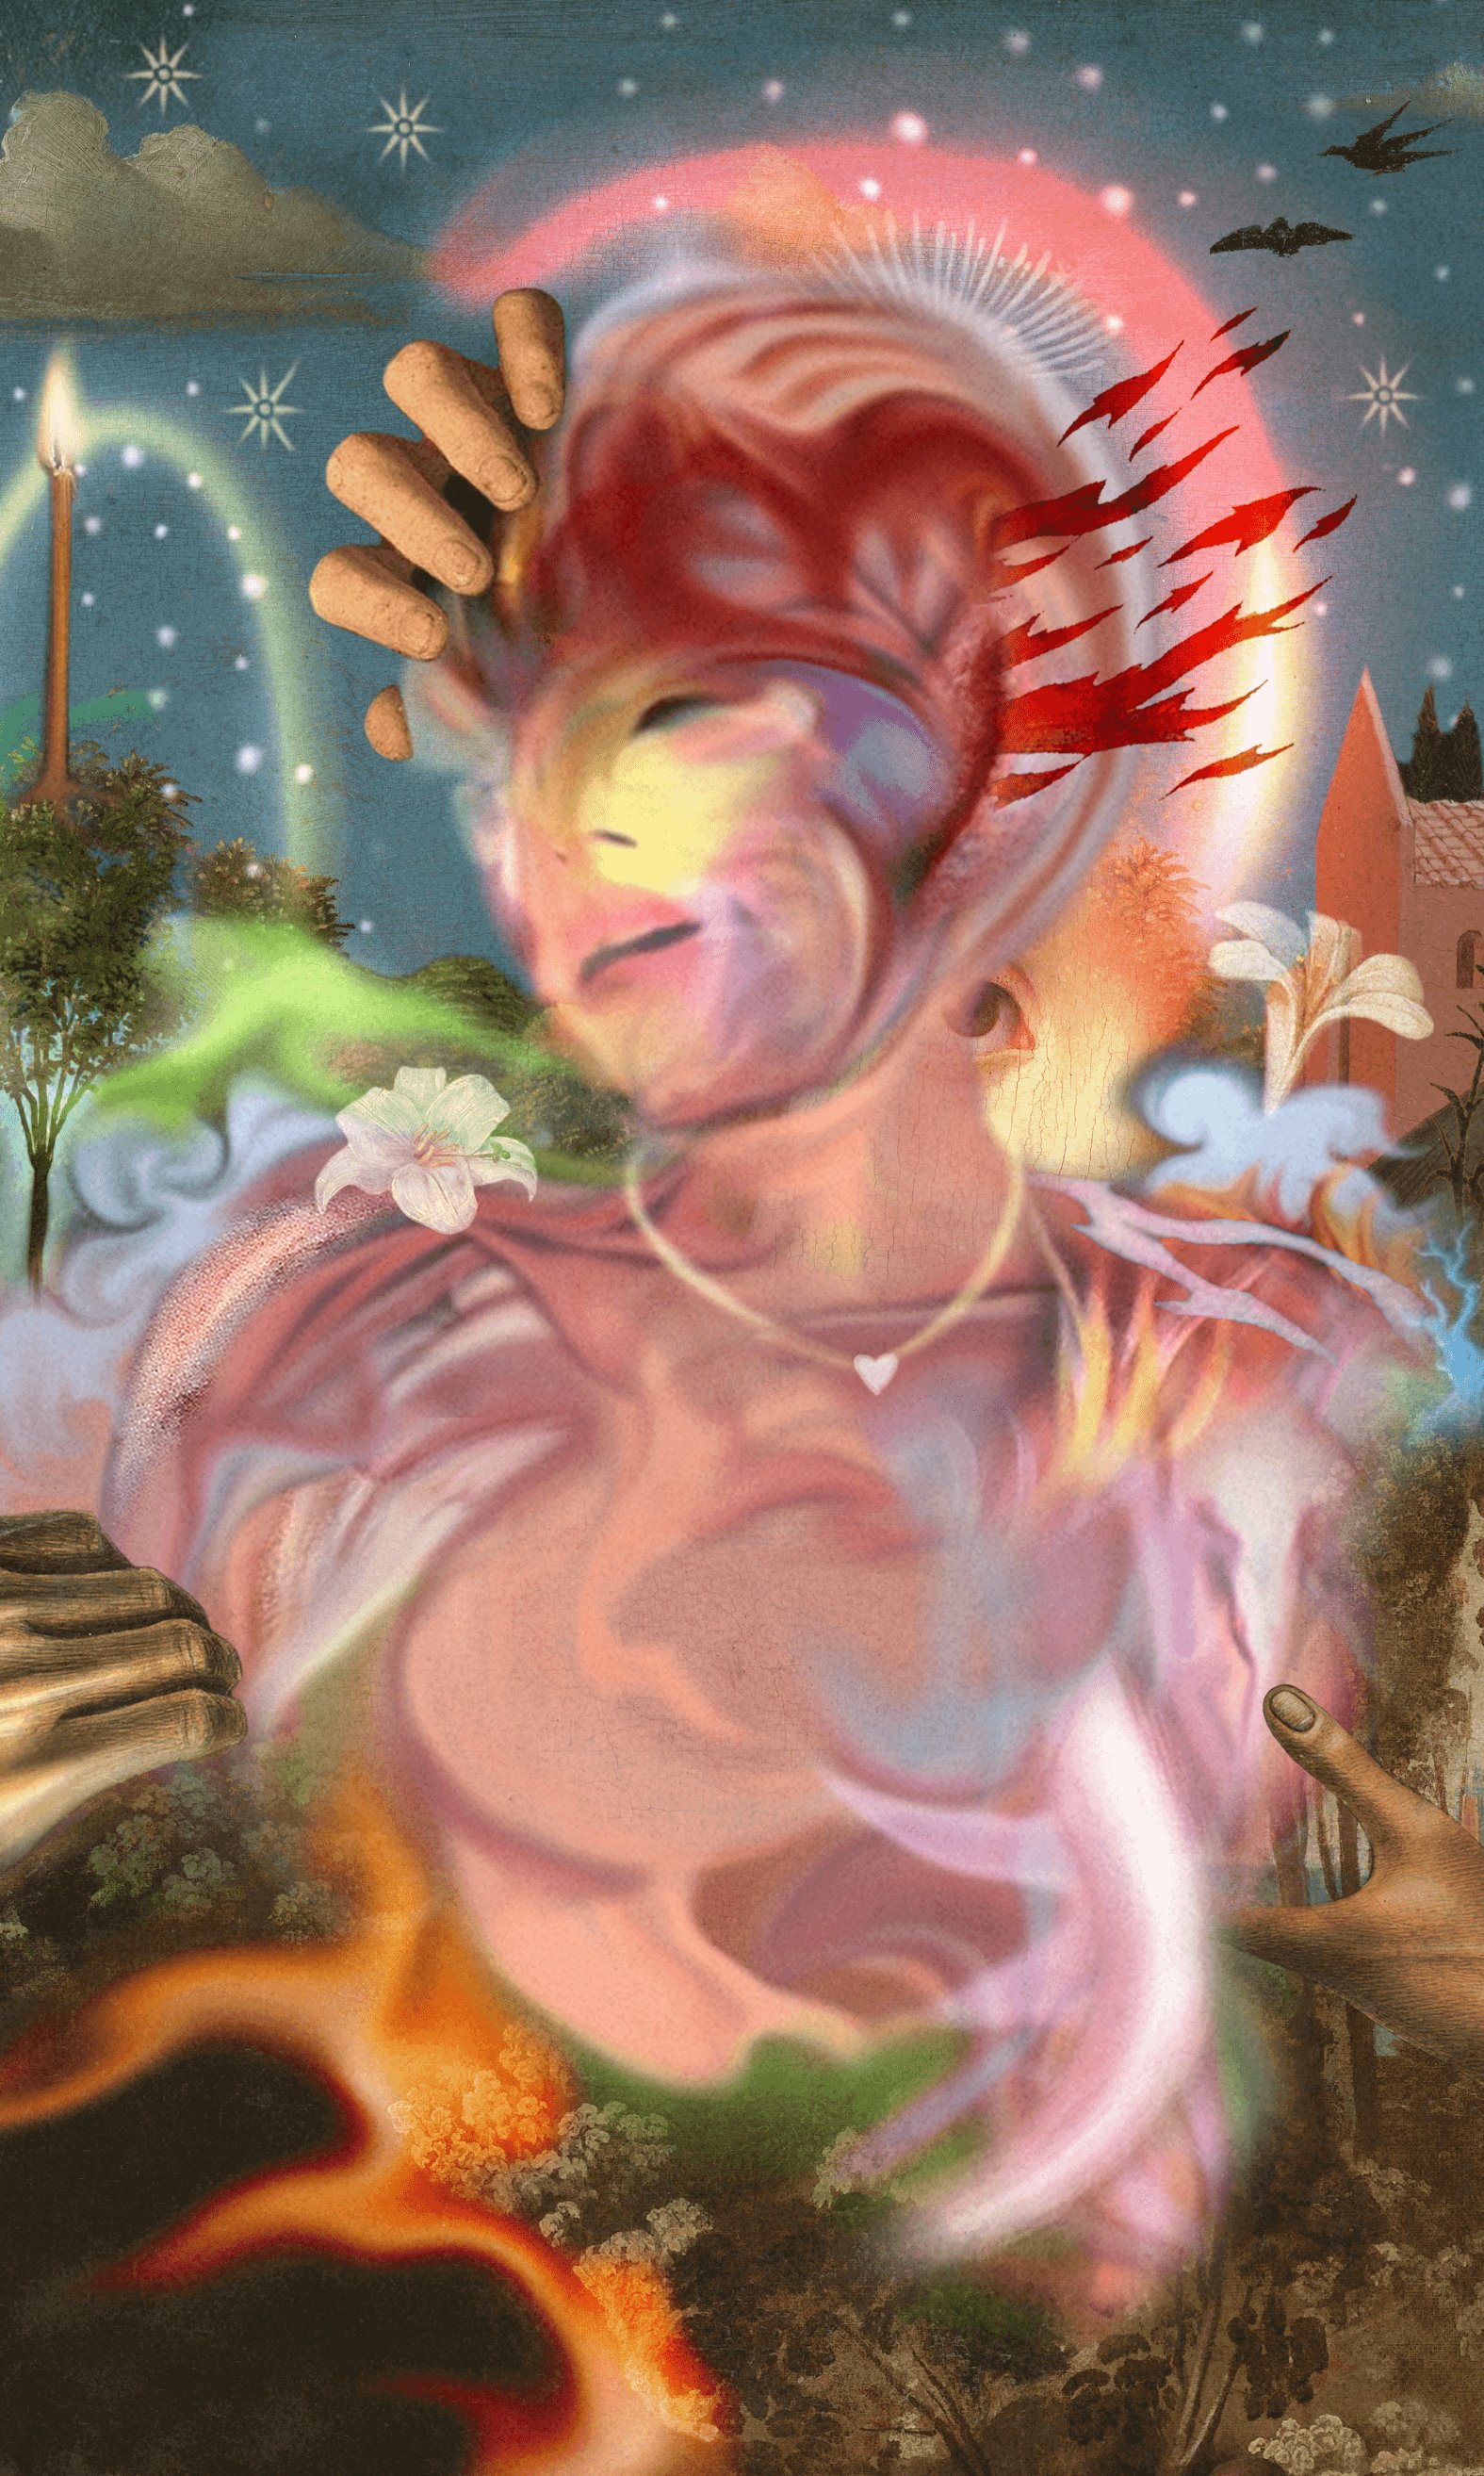 A feminine figure made out of smoke is being ripped apart by a masculine hand. The background is imagery of the Russian countryside.